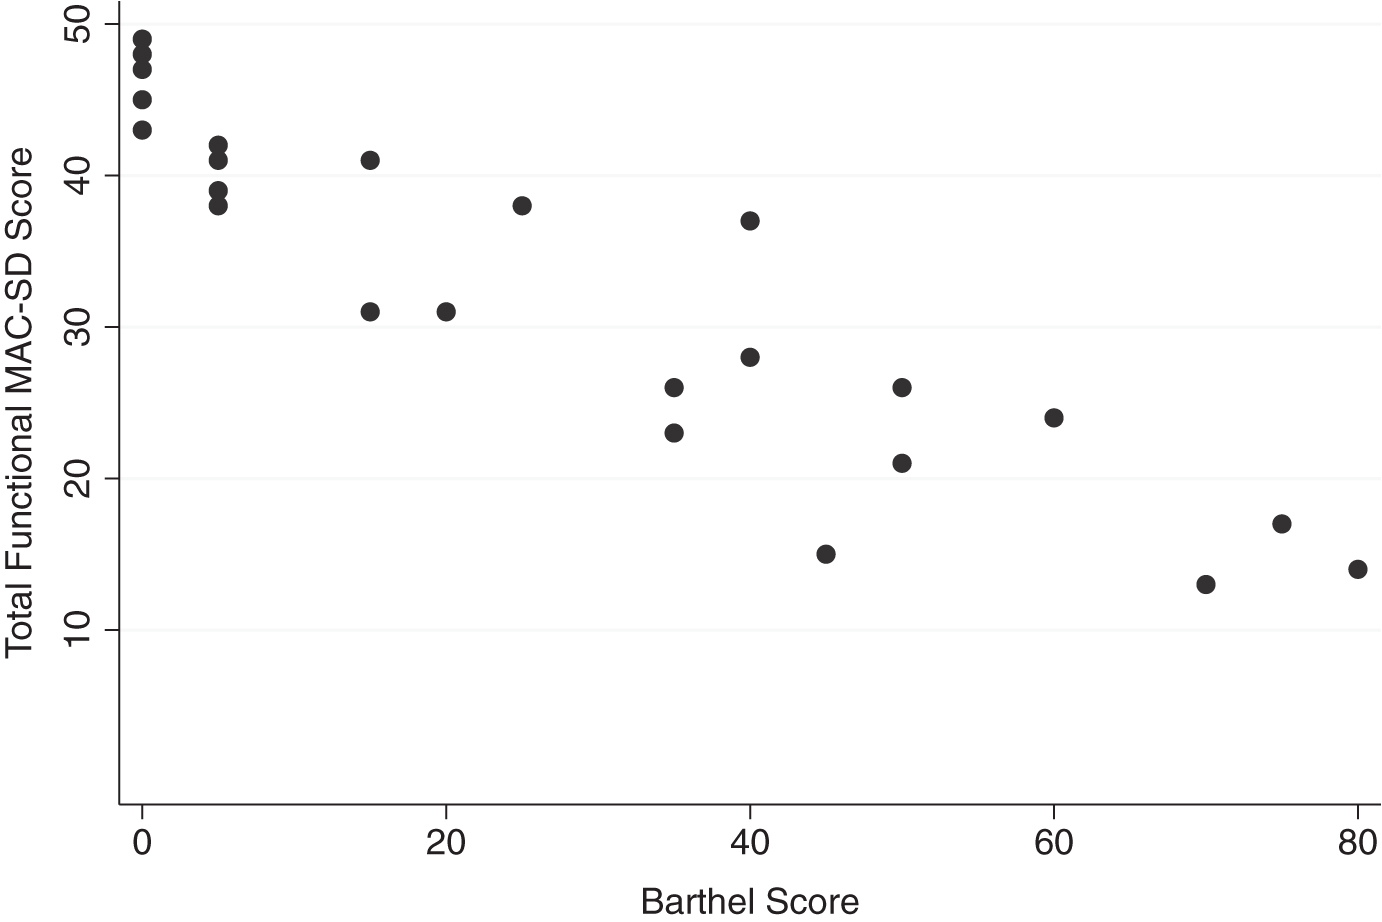 Range of MAC-SD functional scores by Barthel Index of Activities of Daily Living (Barthel) Score. Note the range of MAC-SD scores at each Barthel score, especially Barthel = 0.